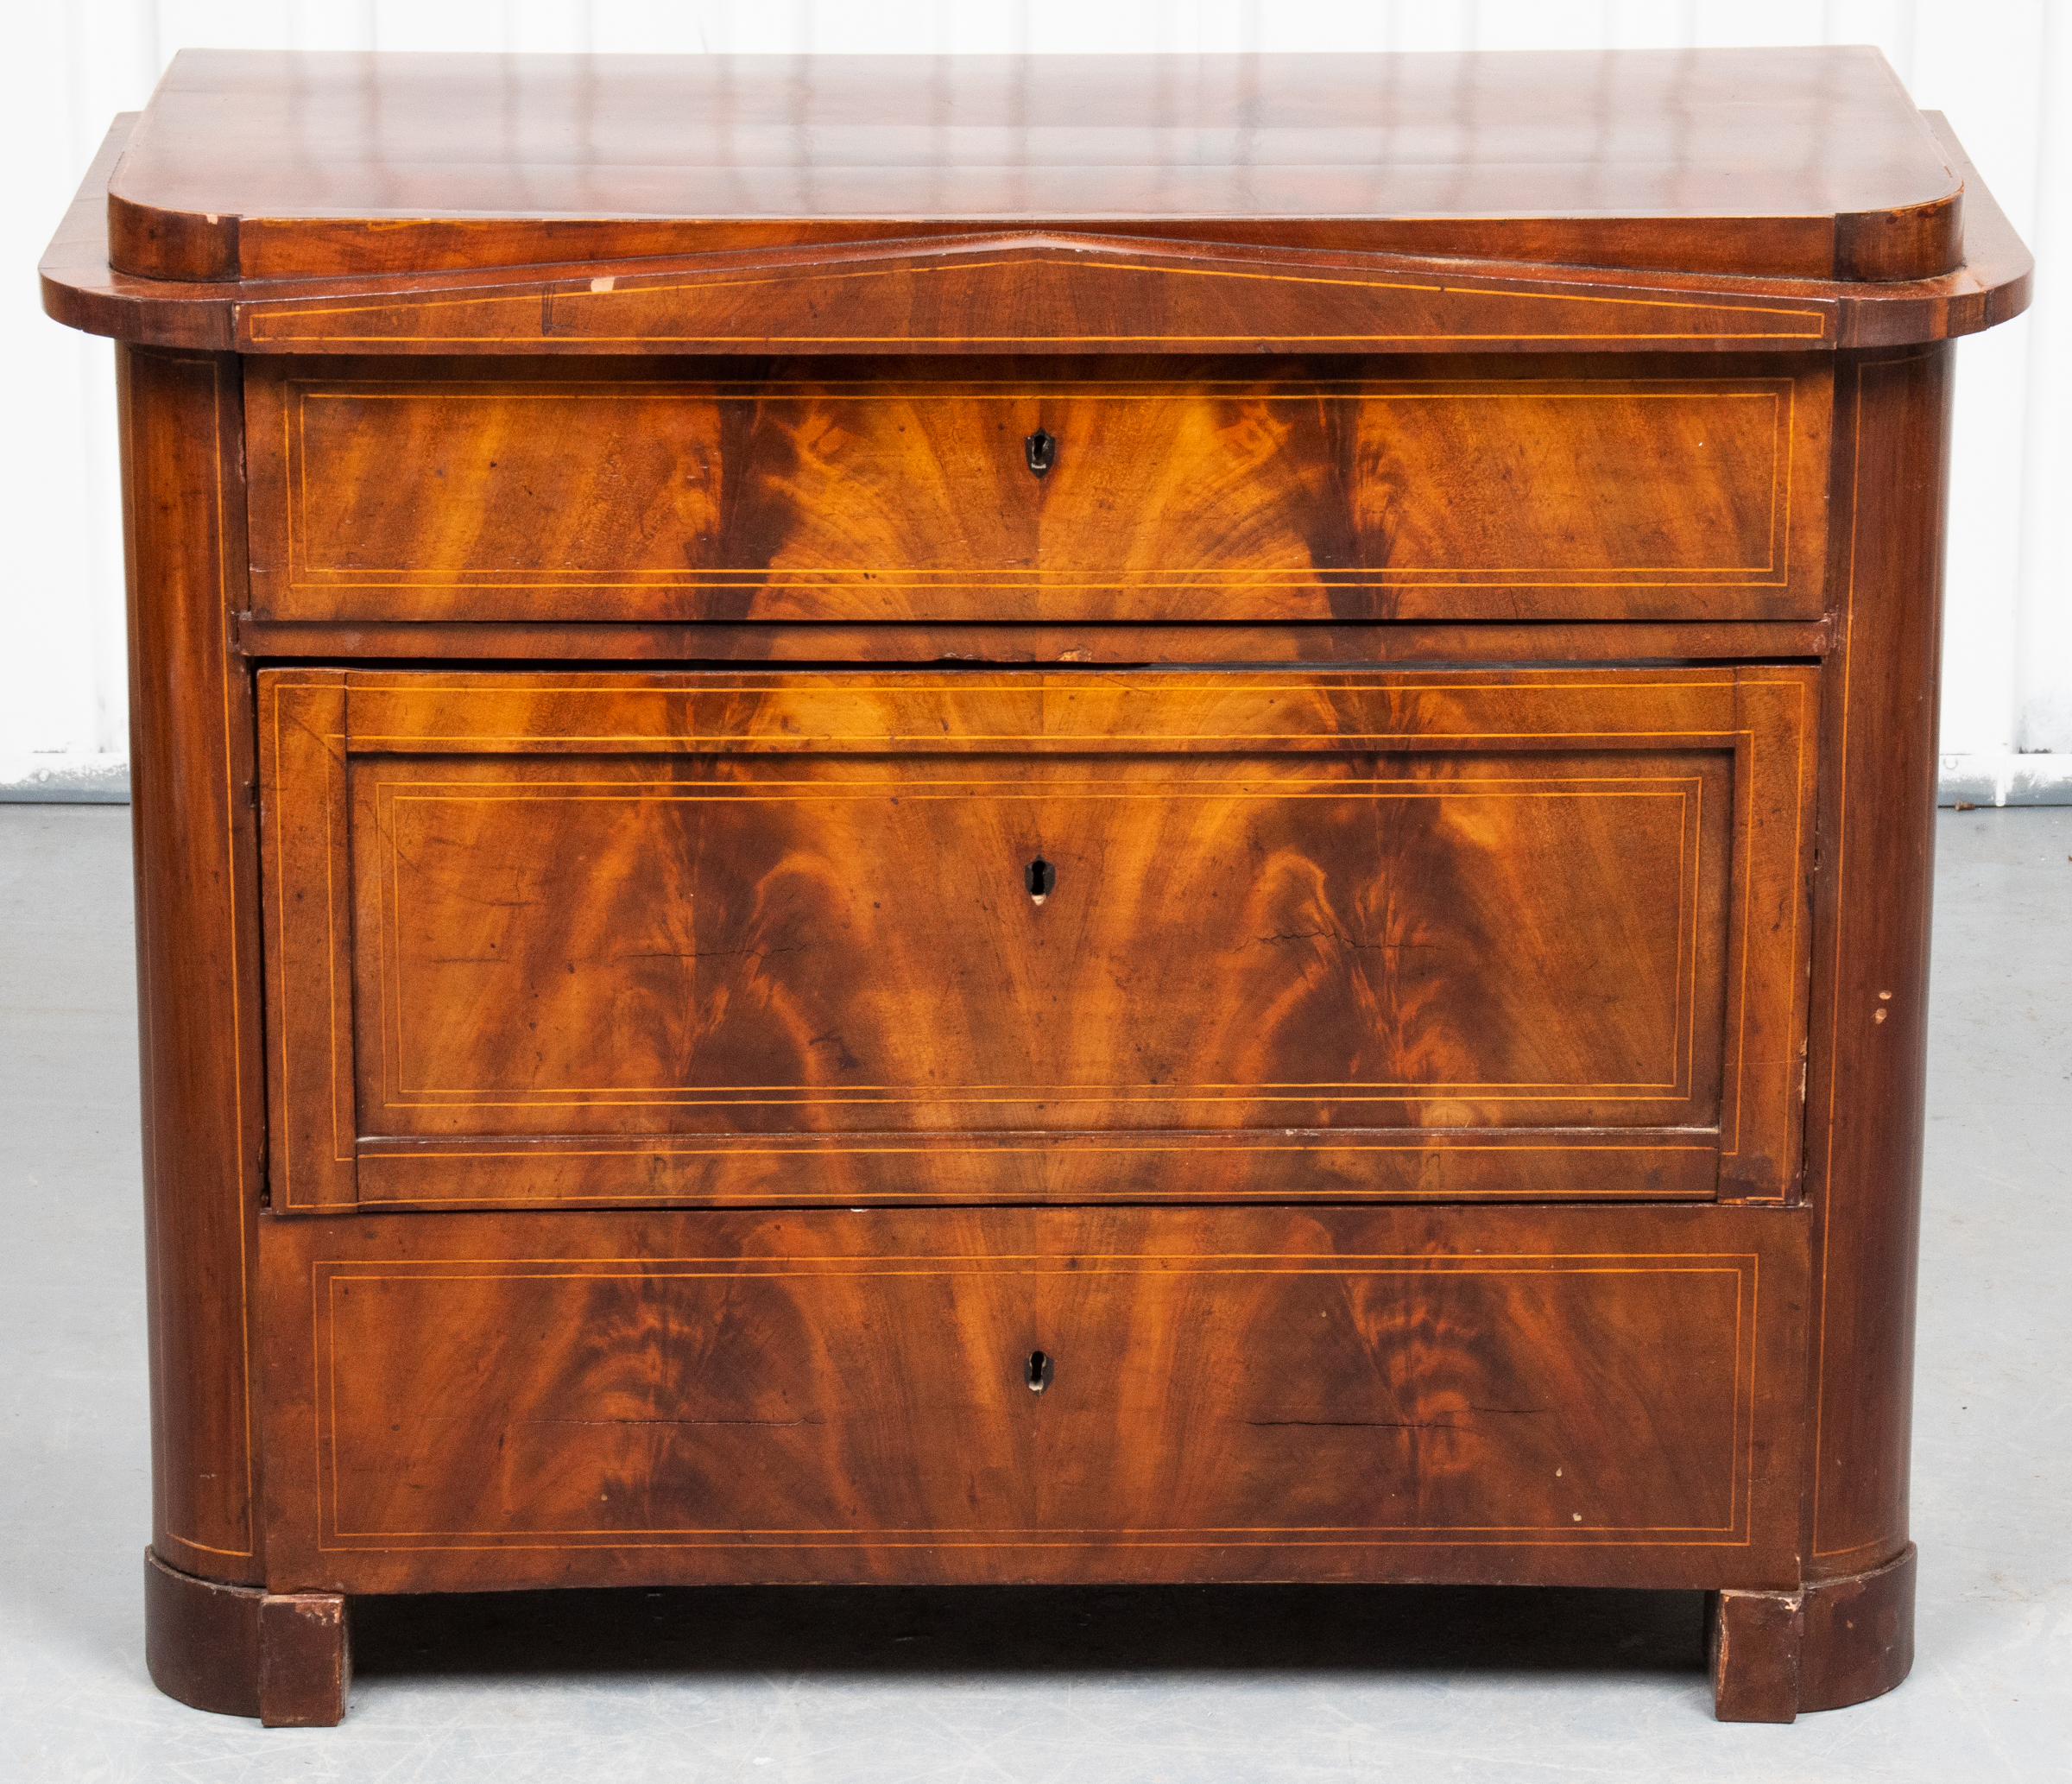 EMPIRE INLAID FLAME MAHOGANY CHEST 3c4a81